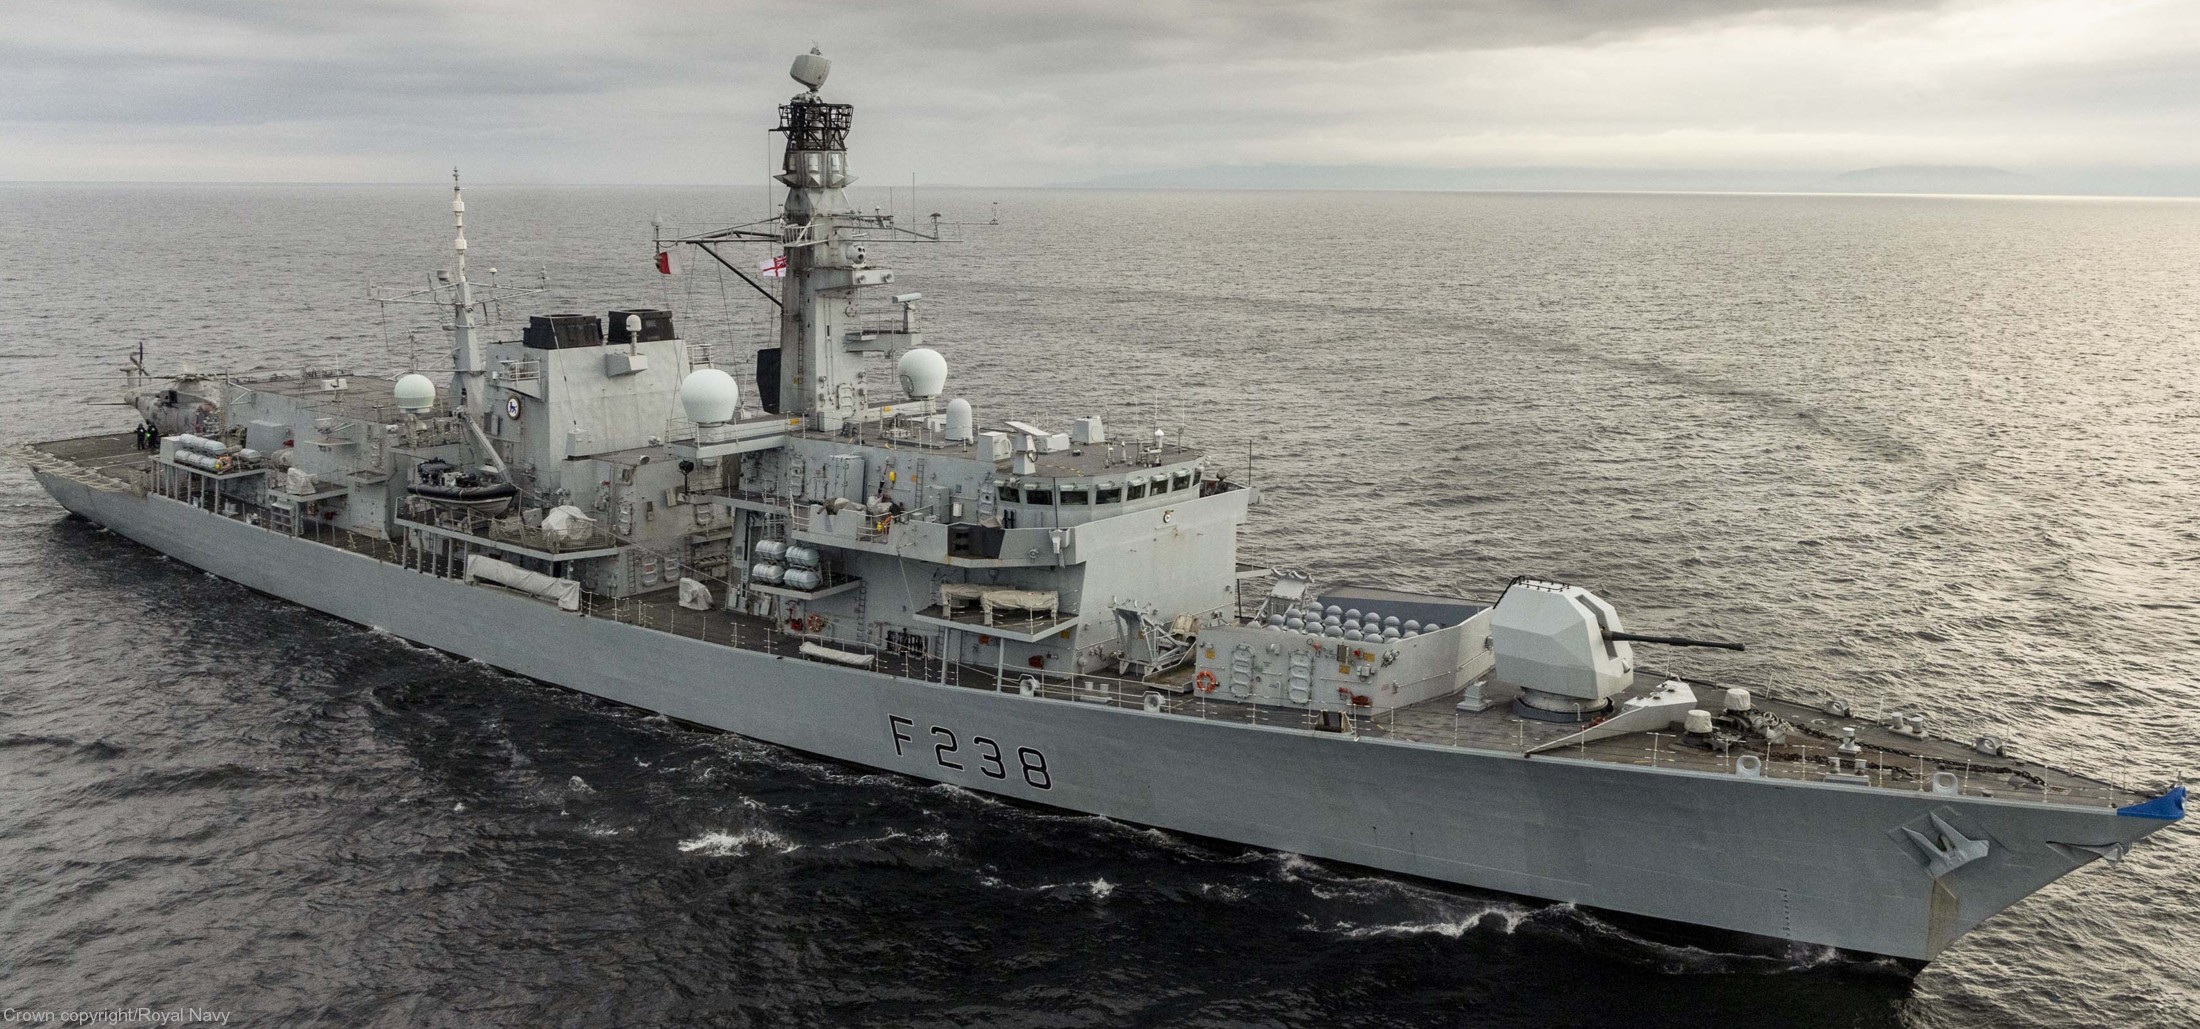 f-238 hms northumberland type 23 duke class guided missile frigate ffg royal navy 47